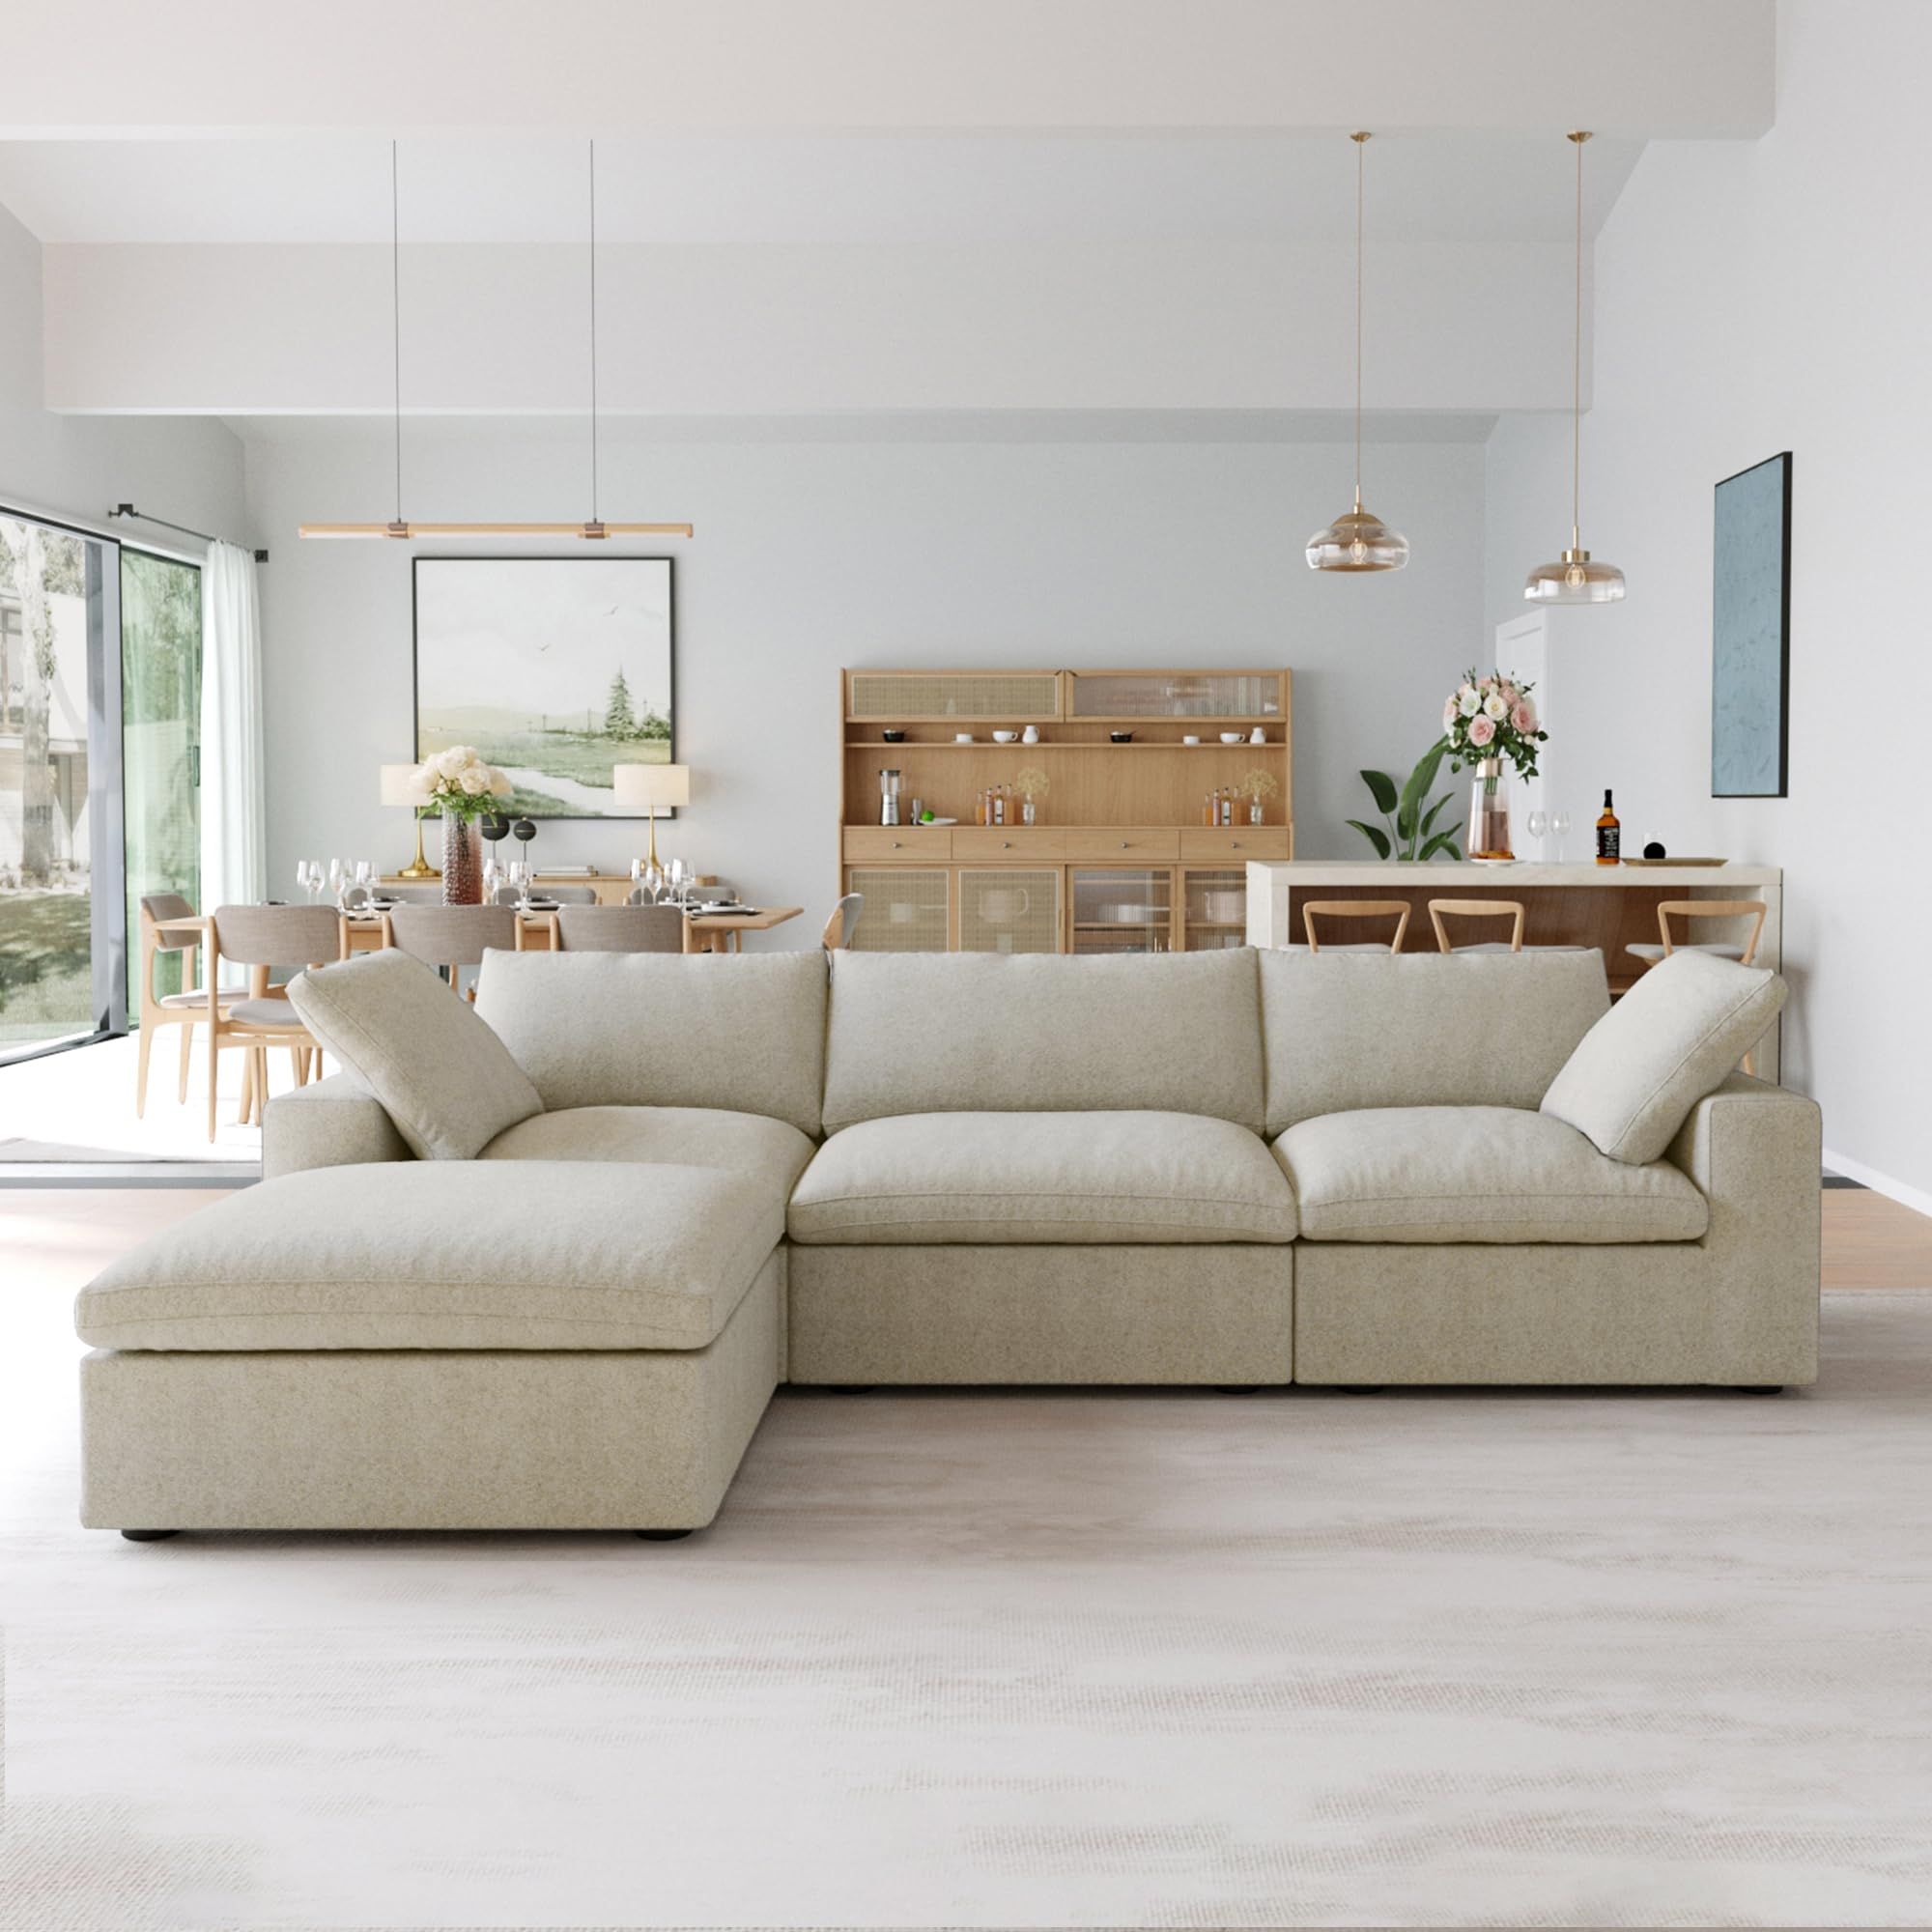 Get Creative with your Space: The Versatility of Modular Sectional Furniture